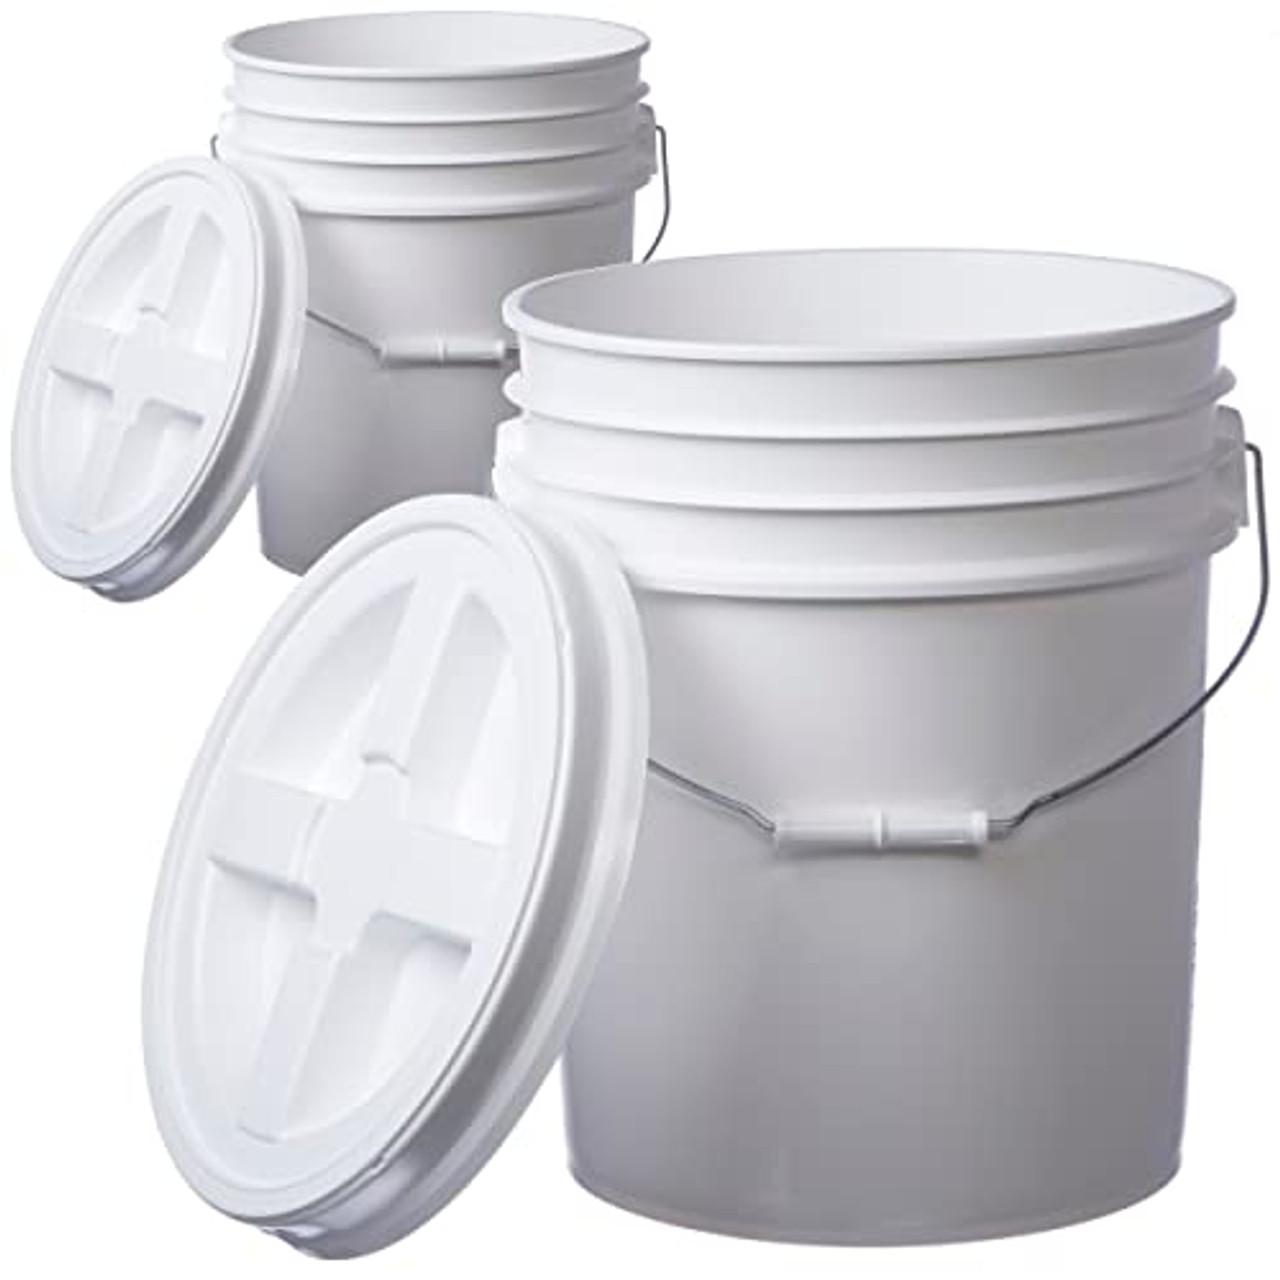 2 Gallon Food Grade BPA Free Plastic Bucket Container with Lid